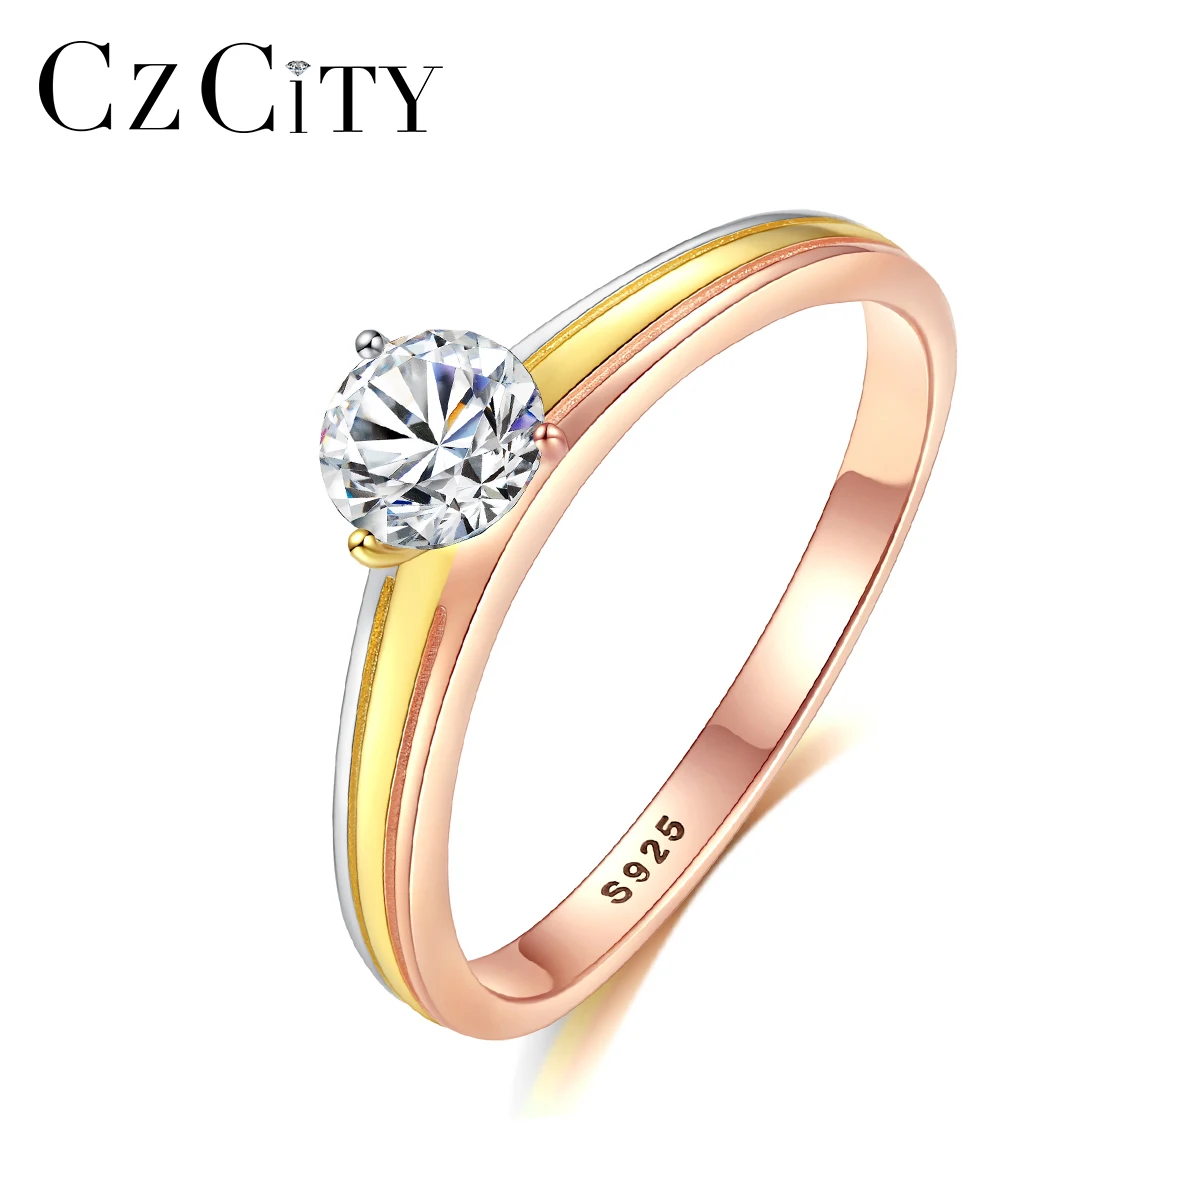 

CZCITY Tricolor Plated Pure 925 Sterling Silver Classic Wedding Rings for Women AAA+ CZ Stone Fine Jewelry Female Anelli Bijoux